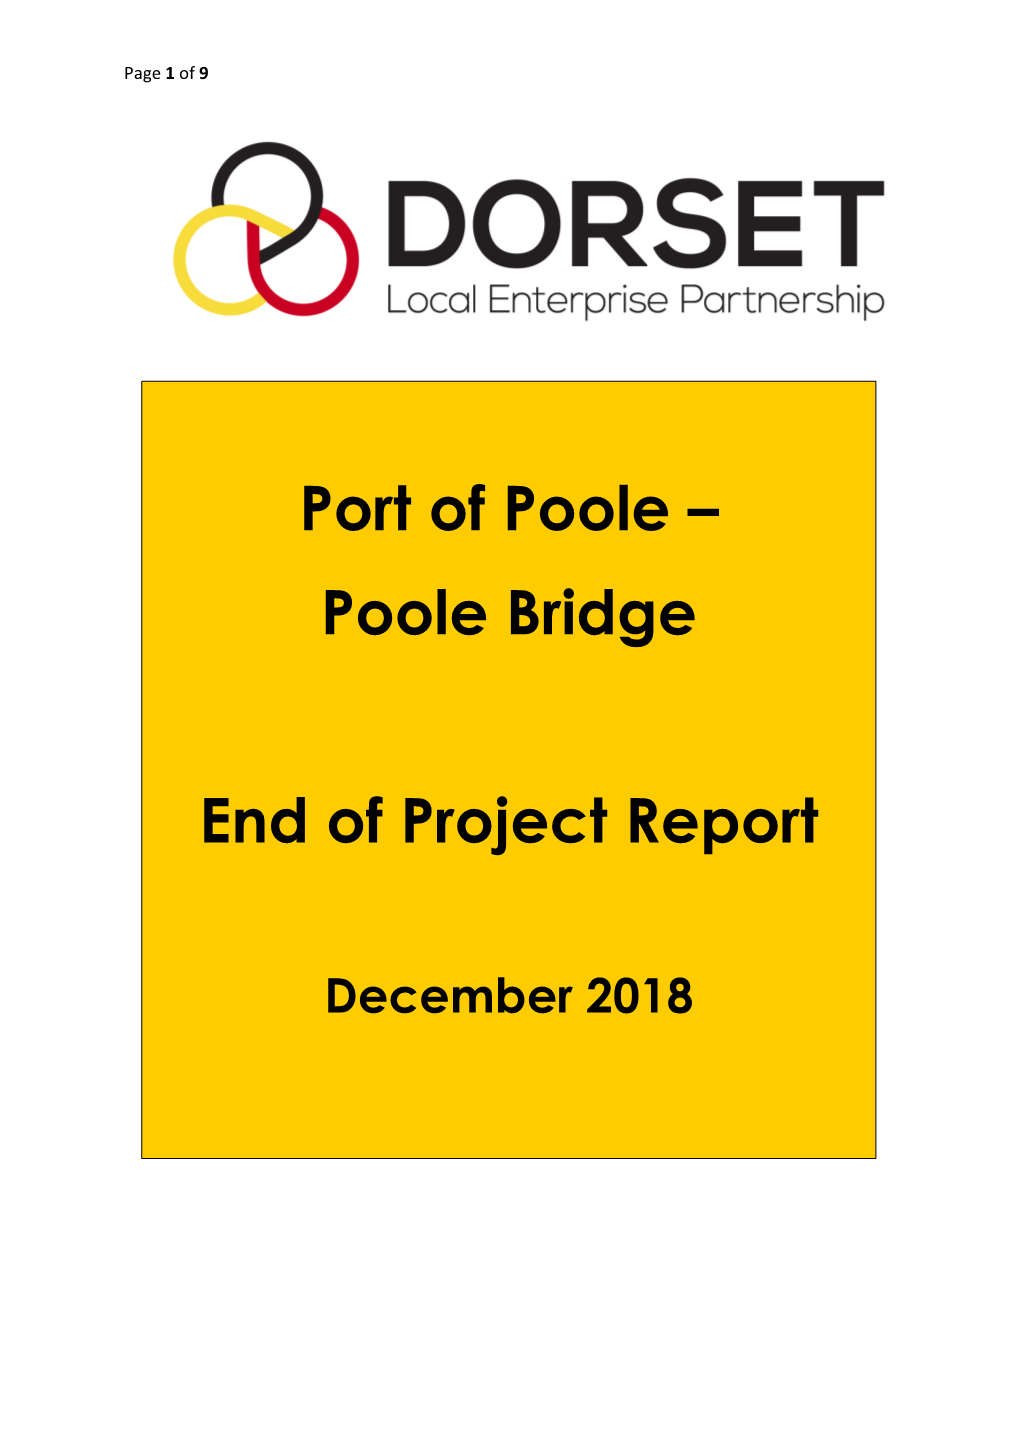 Poole Bridge End of Project Report